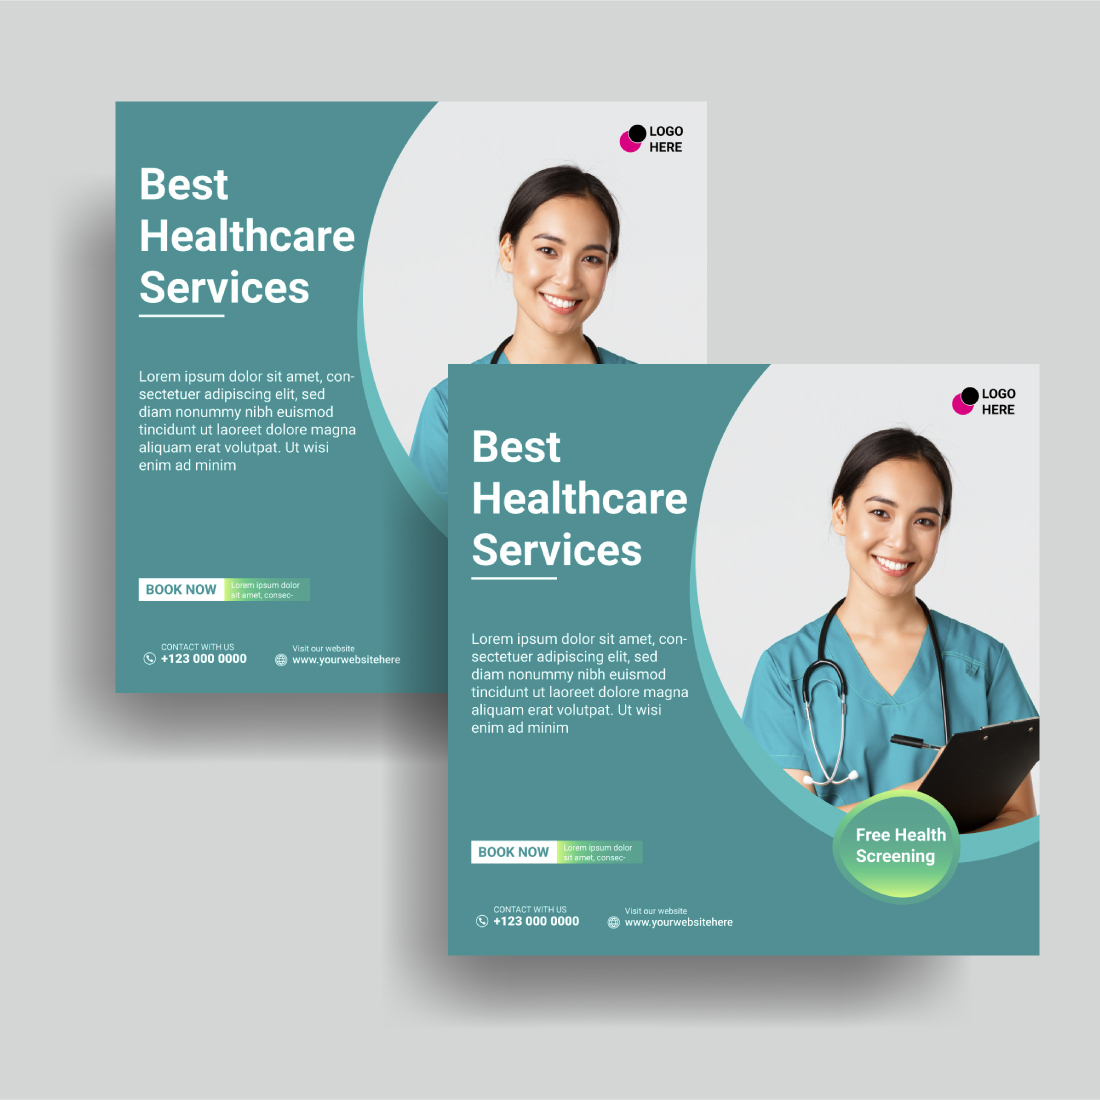 Medical healthcare services social media and instagram post template preview image.